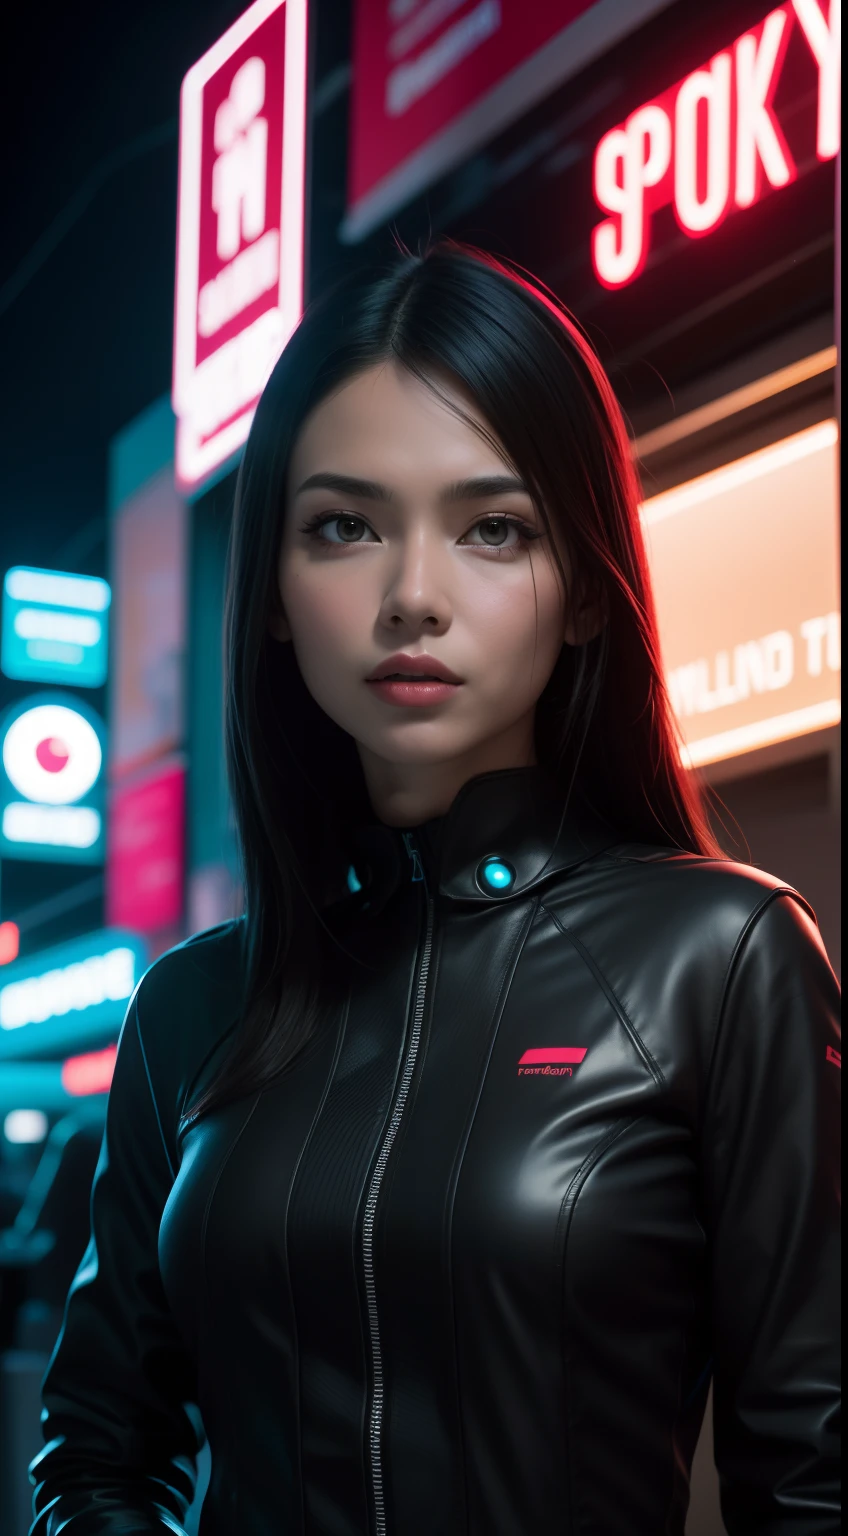 Create a futuristic sci-fi portrait featuring the Malay woman in sleek, high-tech attire, posing against a backdrop of advanced technology and neon lights, symbolizing innovation and progress